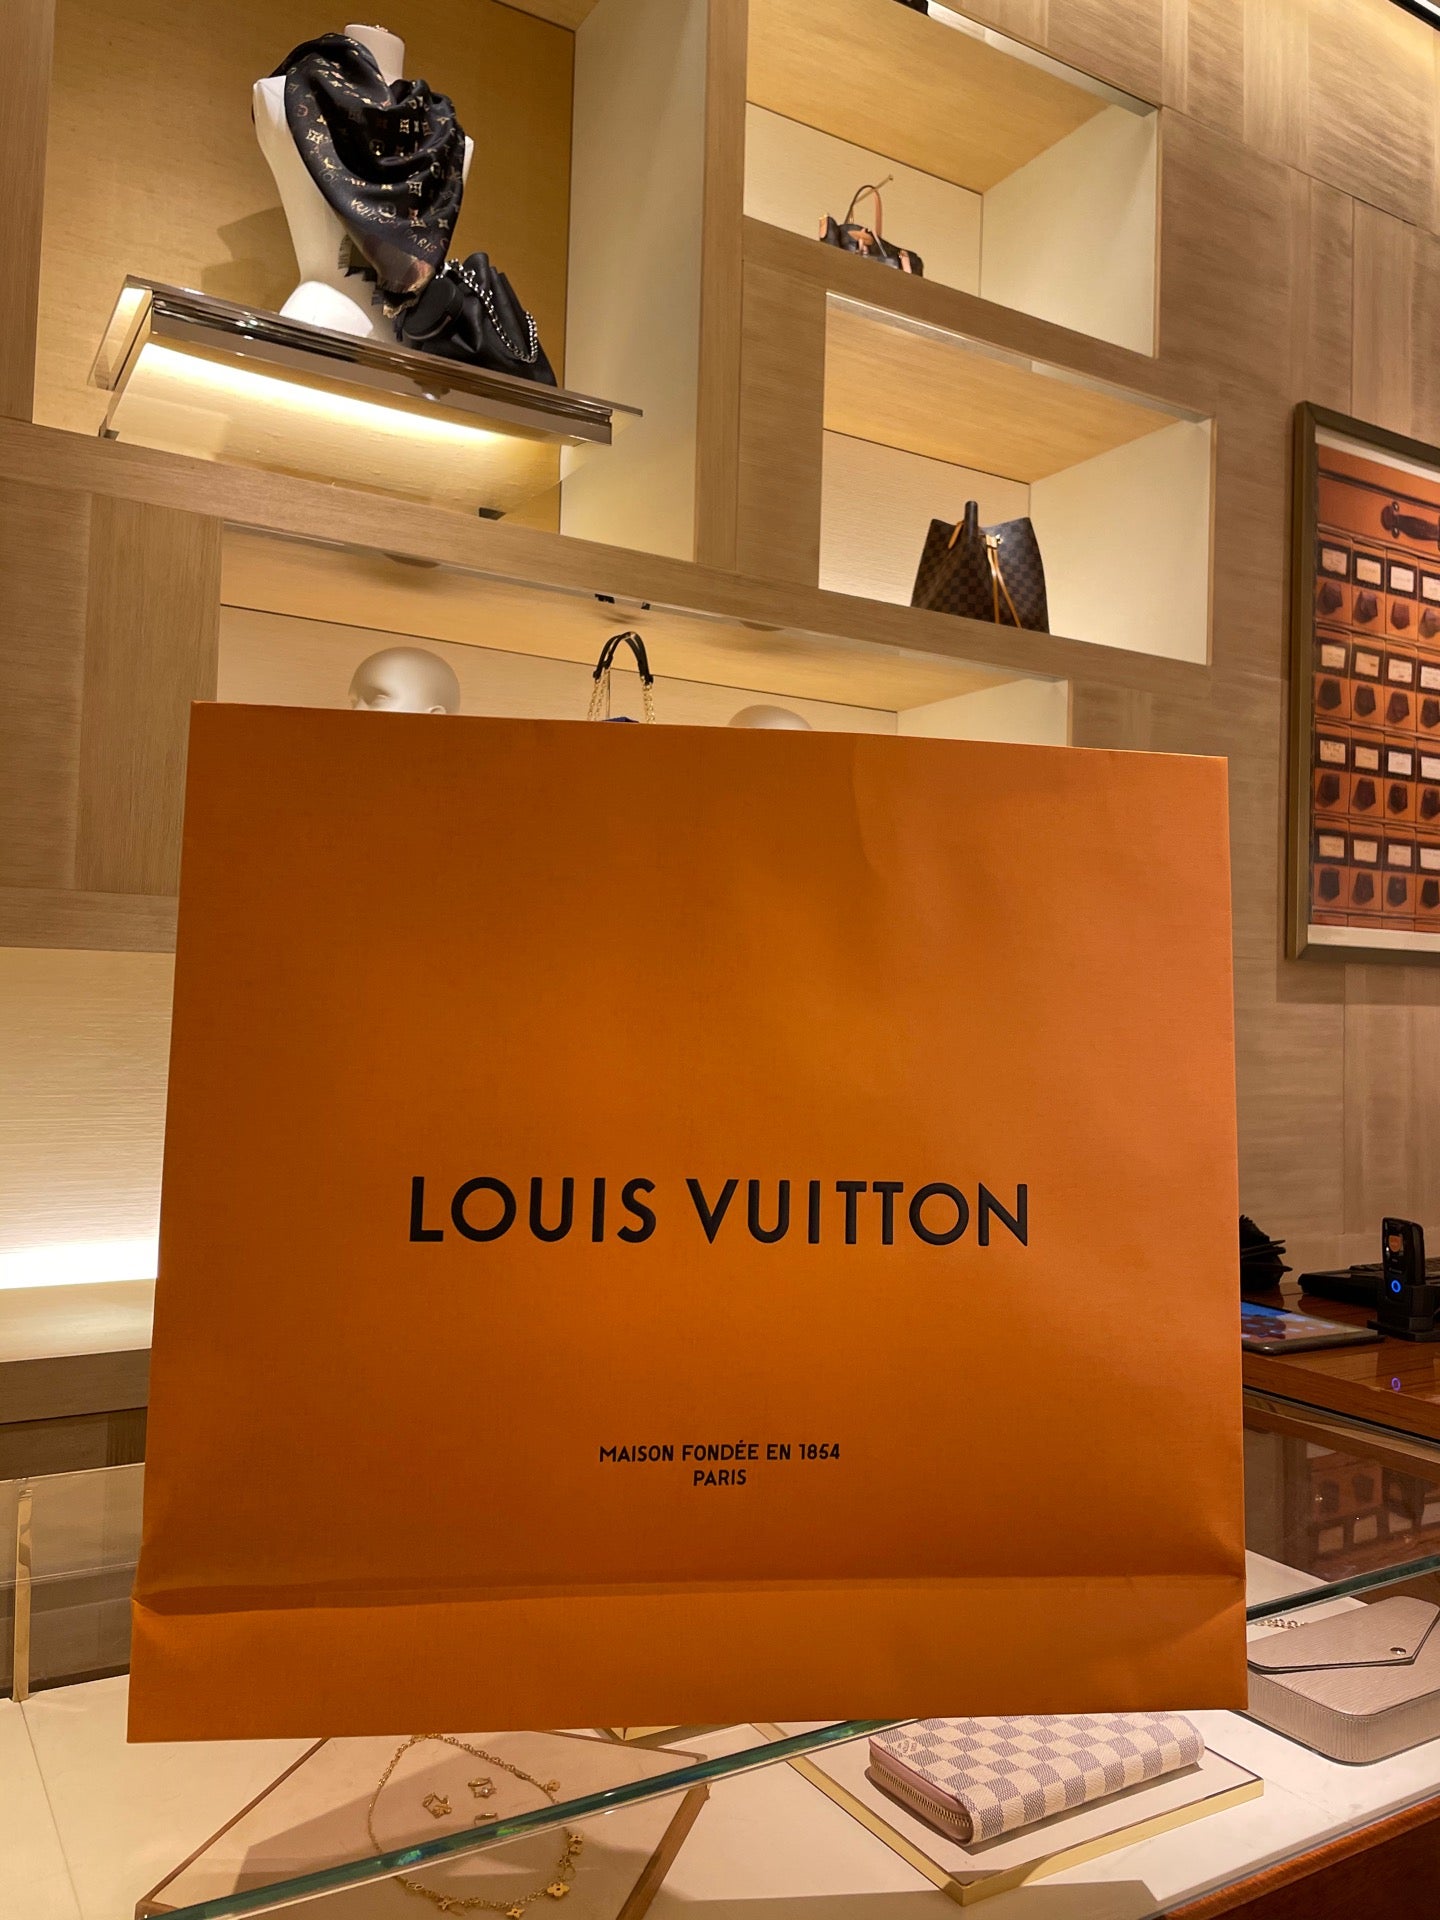 LOUIS VUITTON WASHINGTON DC CITYCENTER  28 Photos  92 Reviews  943  Palmer Alley NW Washington District of Columbia  Leather Goods  Phone  Number  Yelp